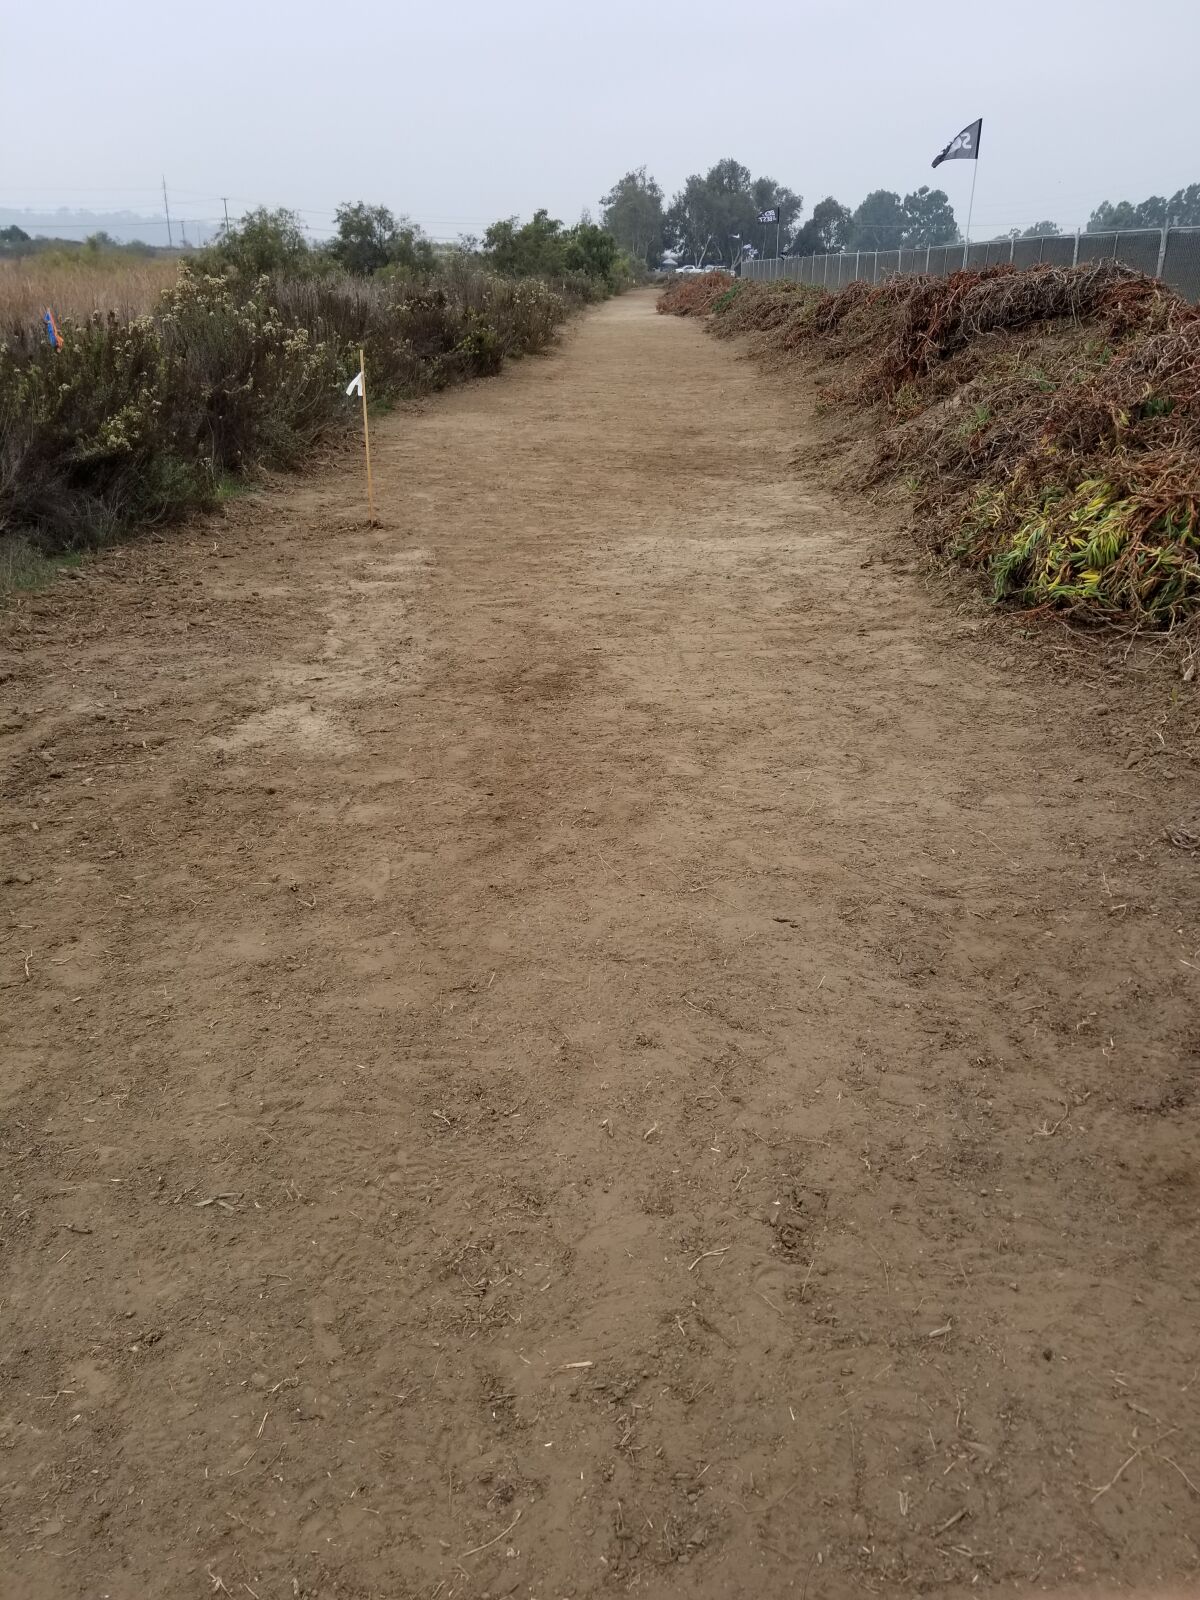 The widened and revitalized trail.